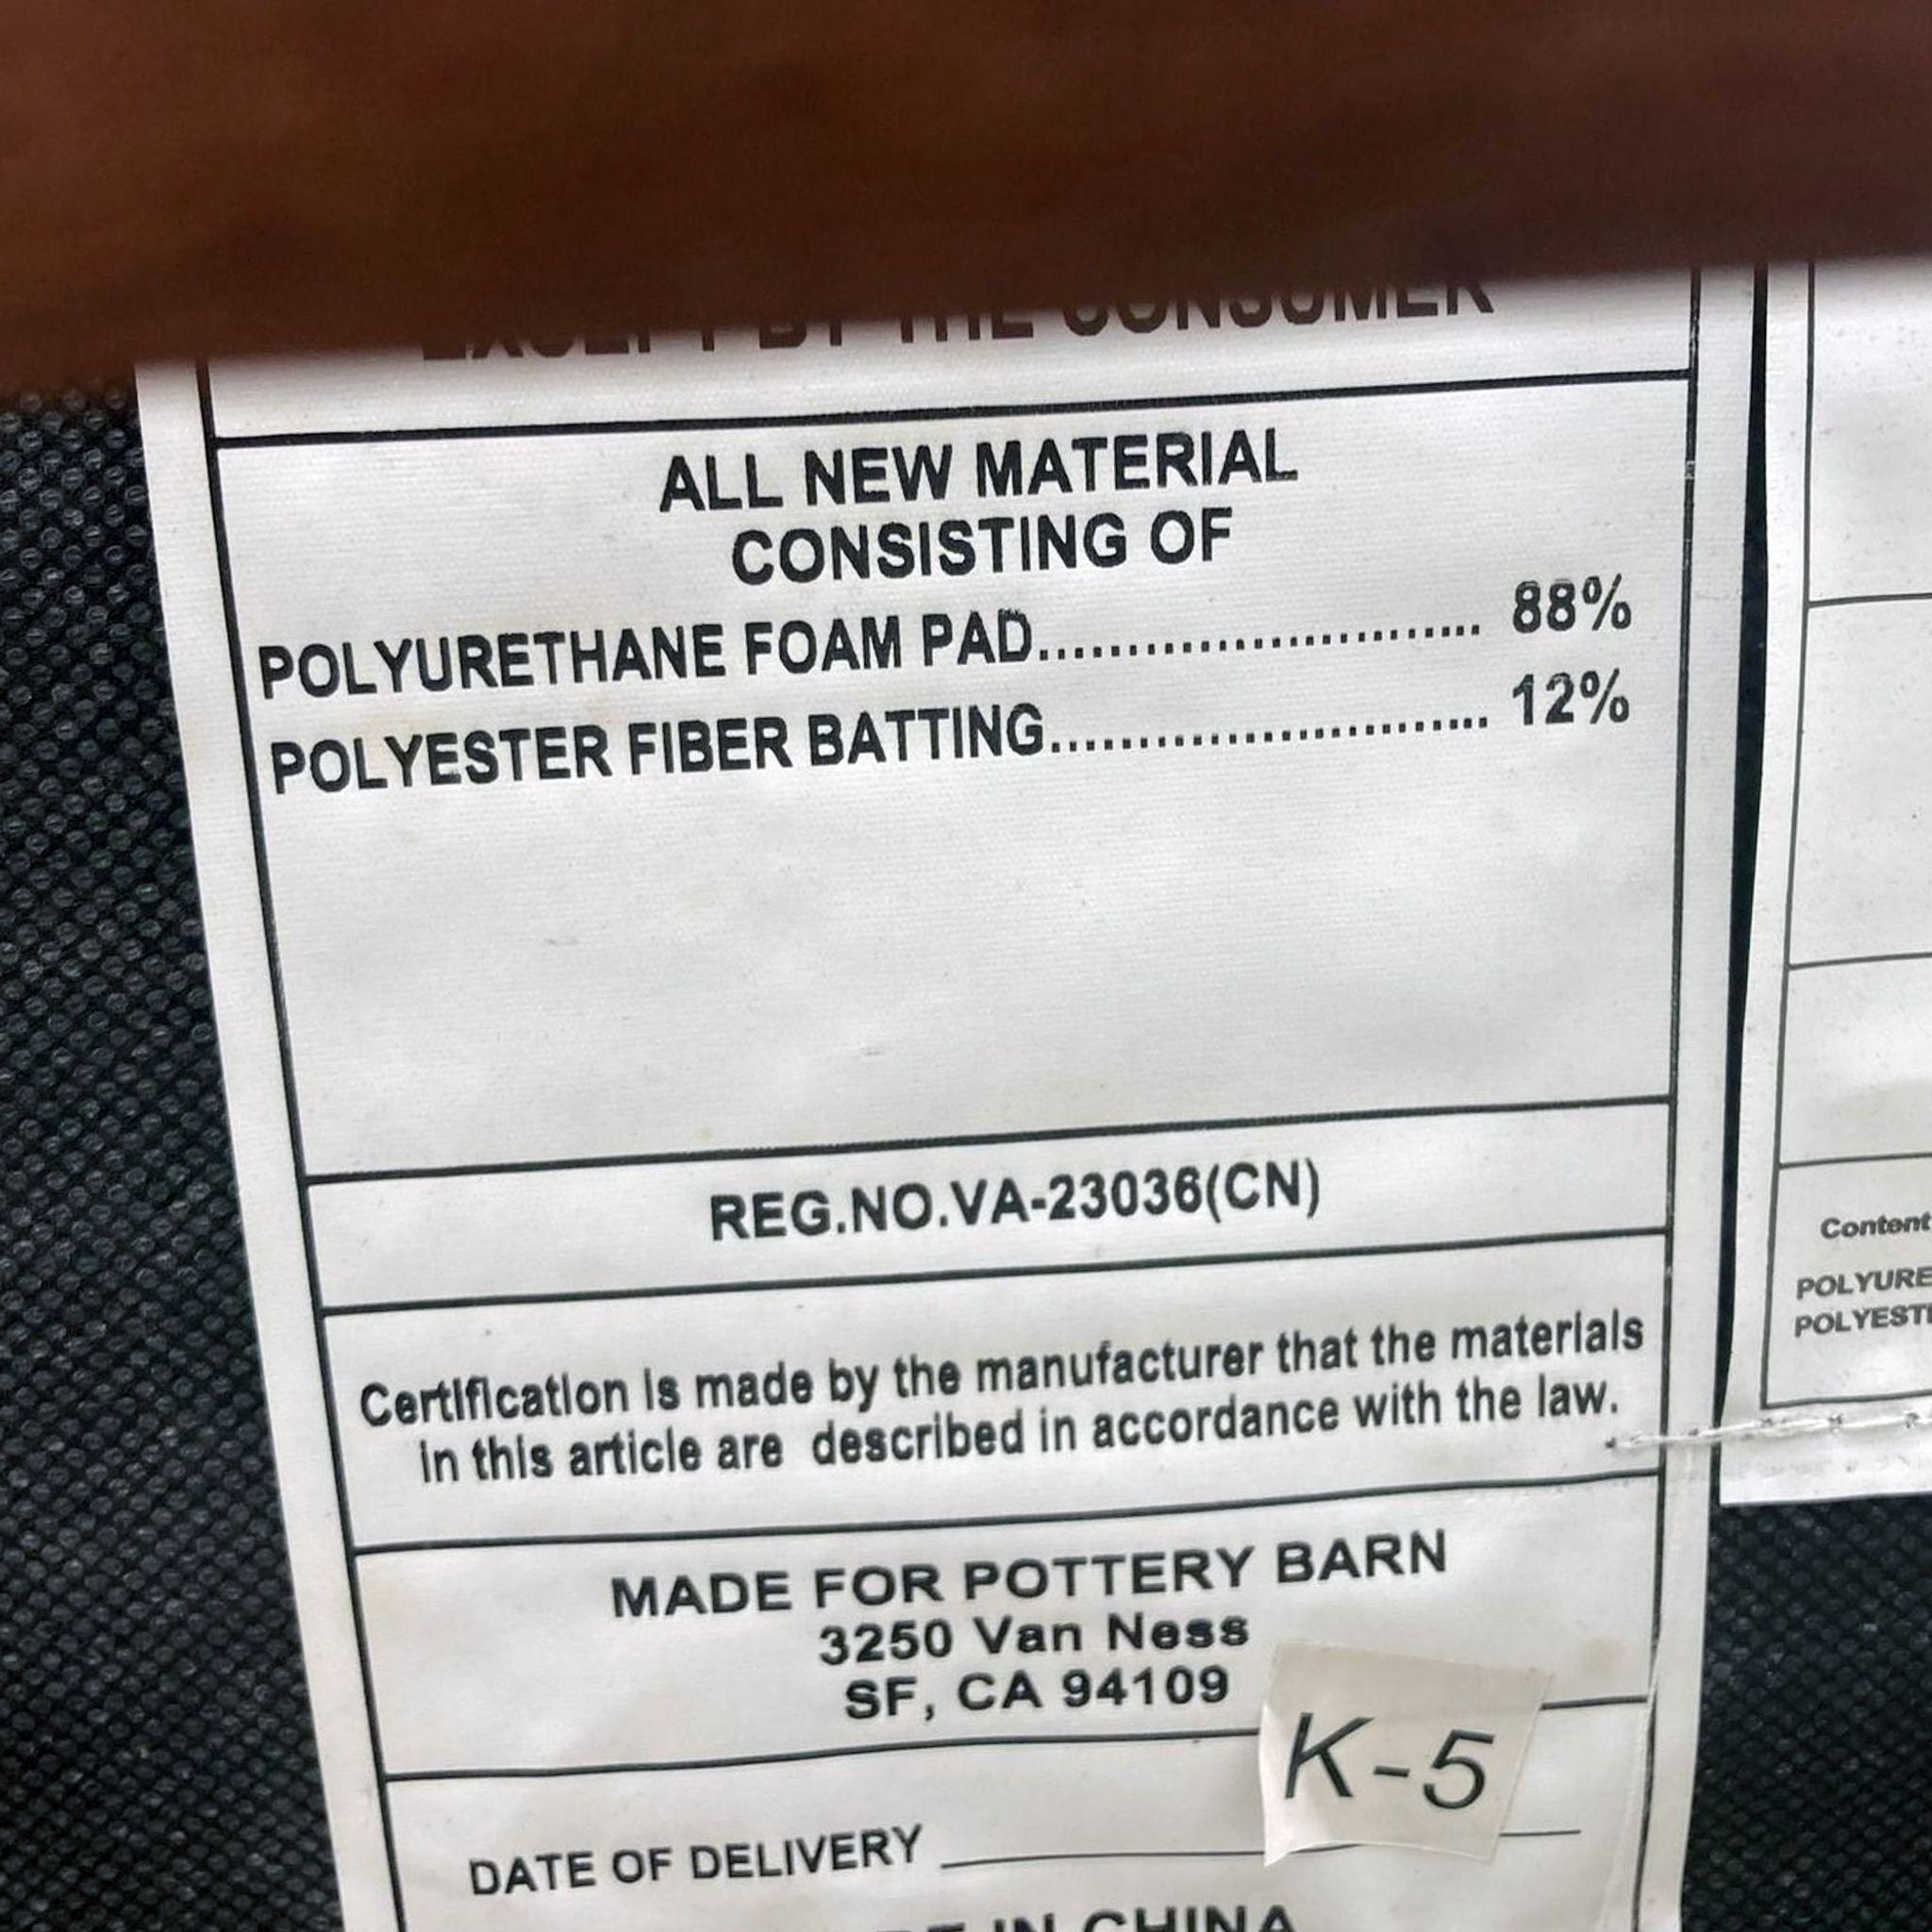 3. "Detailed product tag showing material composition for a Pottery Barn padded item, made in China."